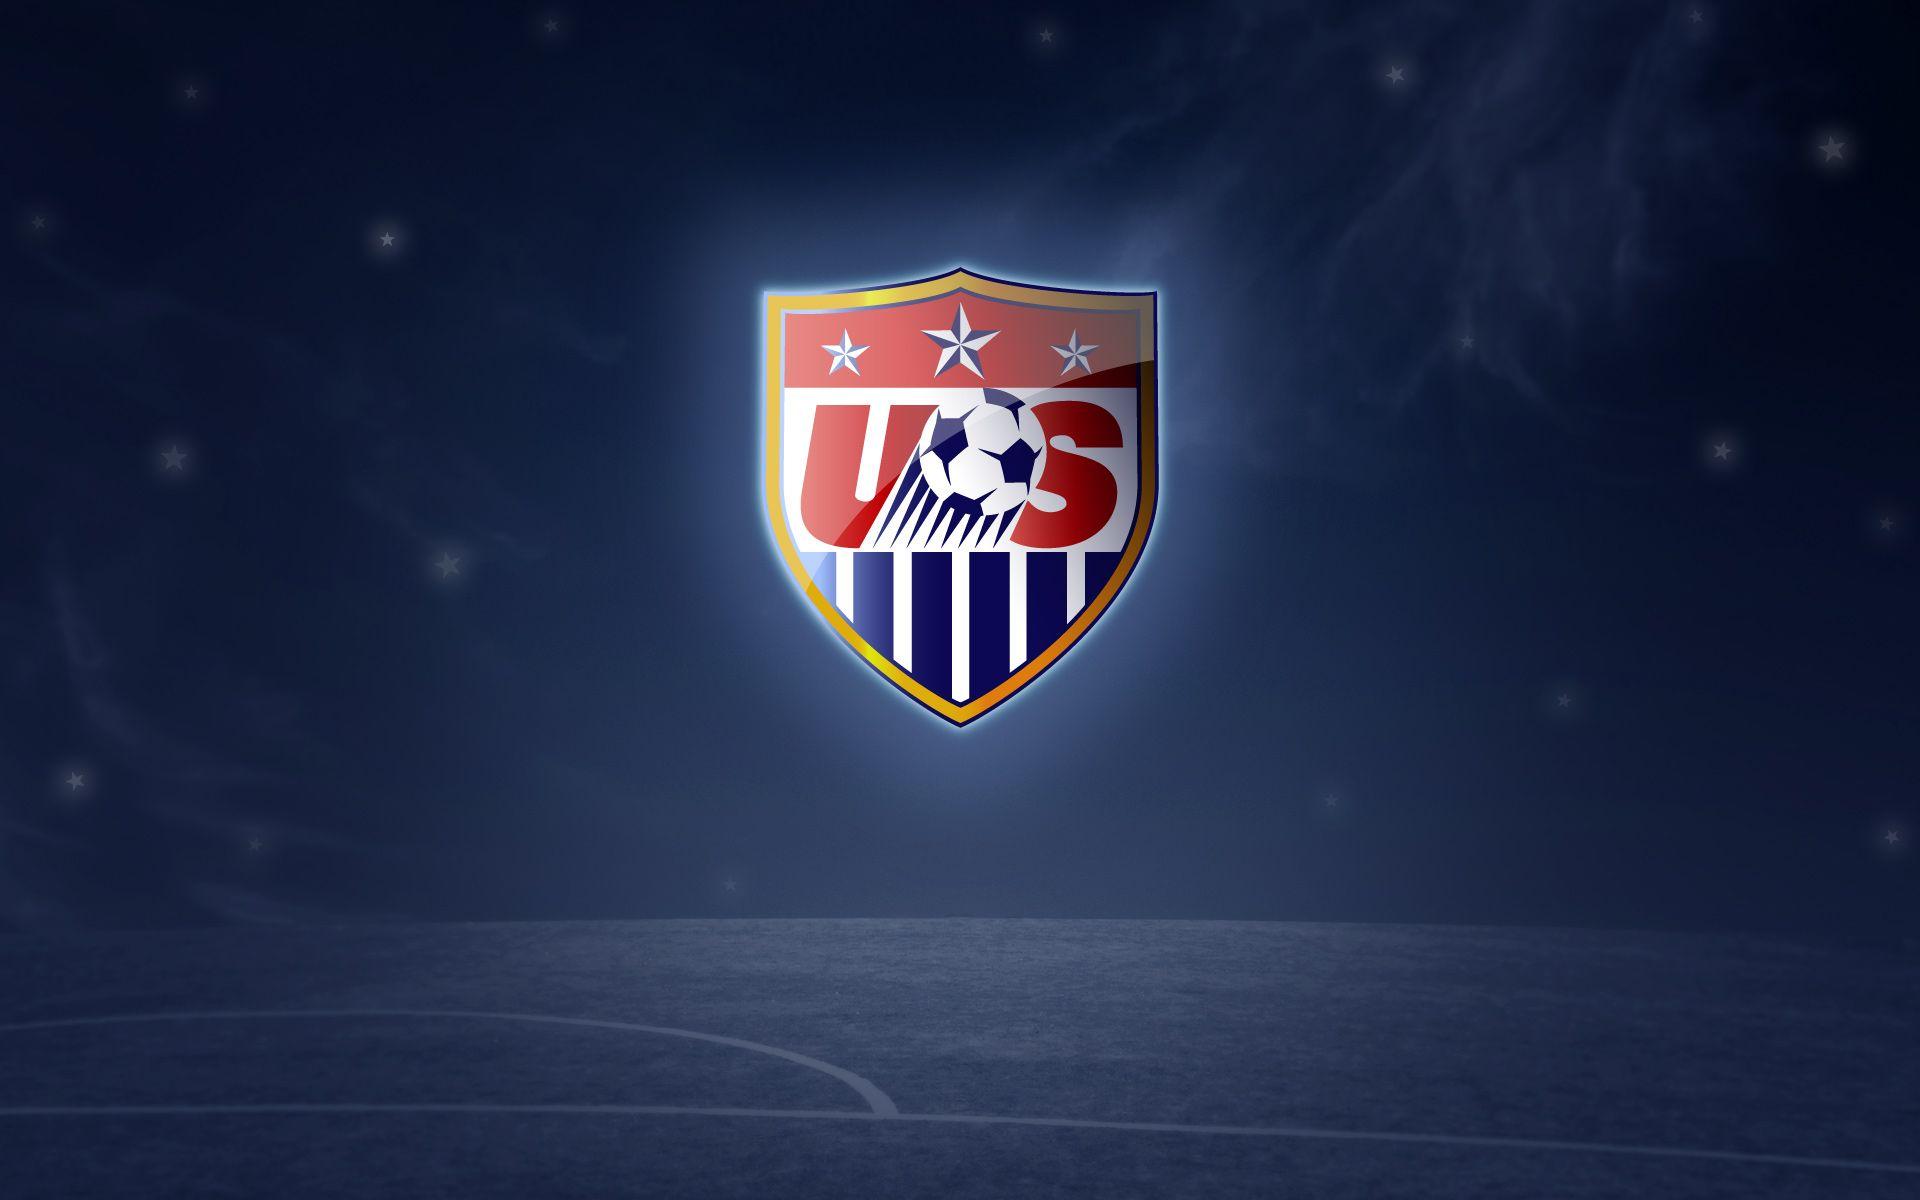 Download the USA World Cup Wallpaper, USA World Cup iPhone Wallpaper